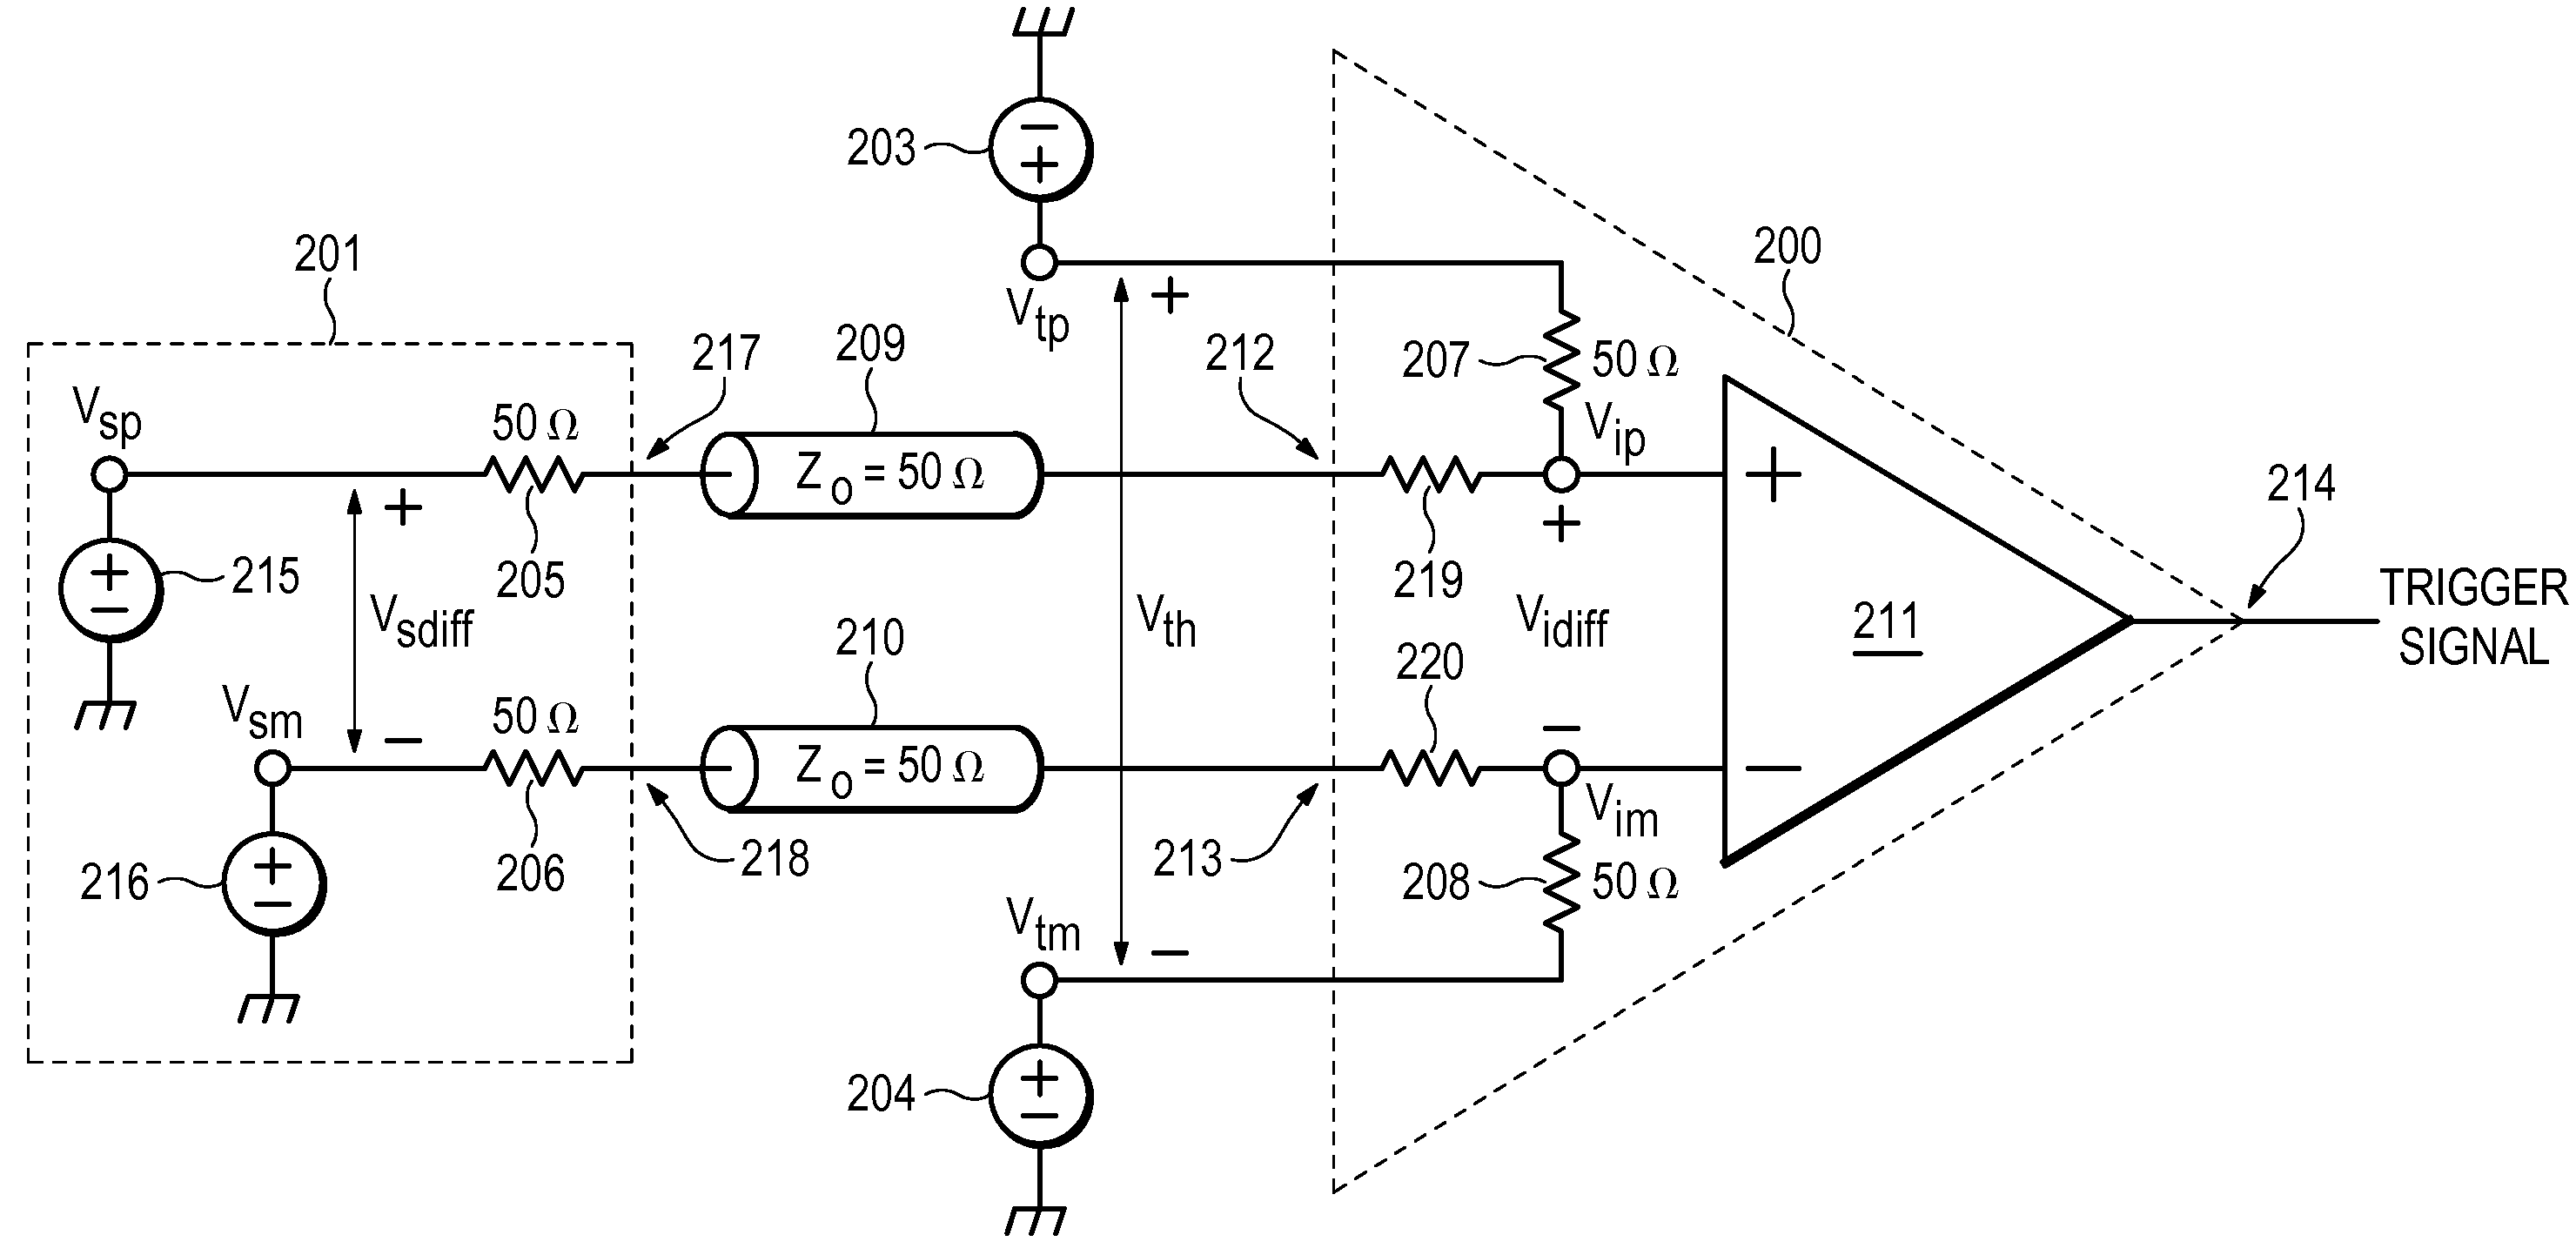 Generating a trigger from a differential signal